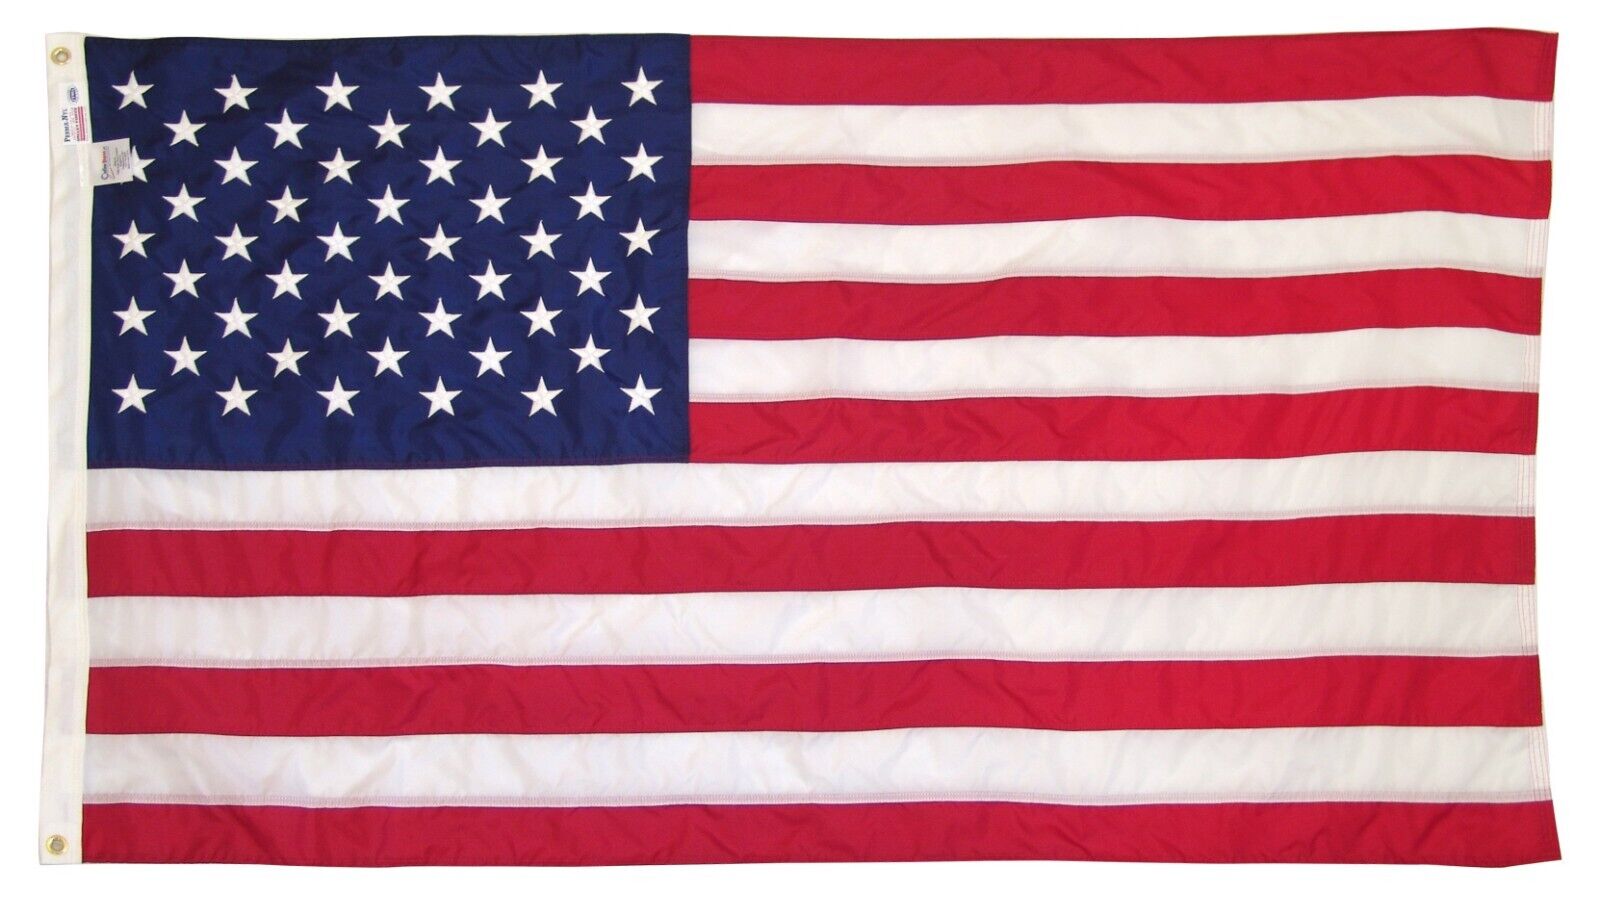 American Flag 3'x5' Nylon - Certified Made in USA - Sewn Stripes & Embroidered